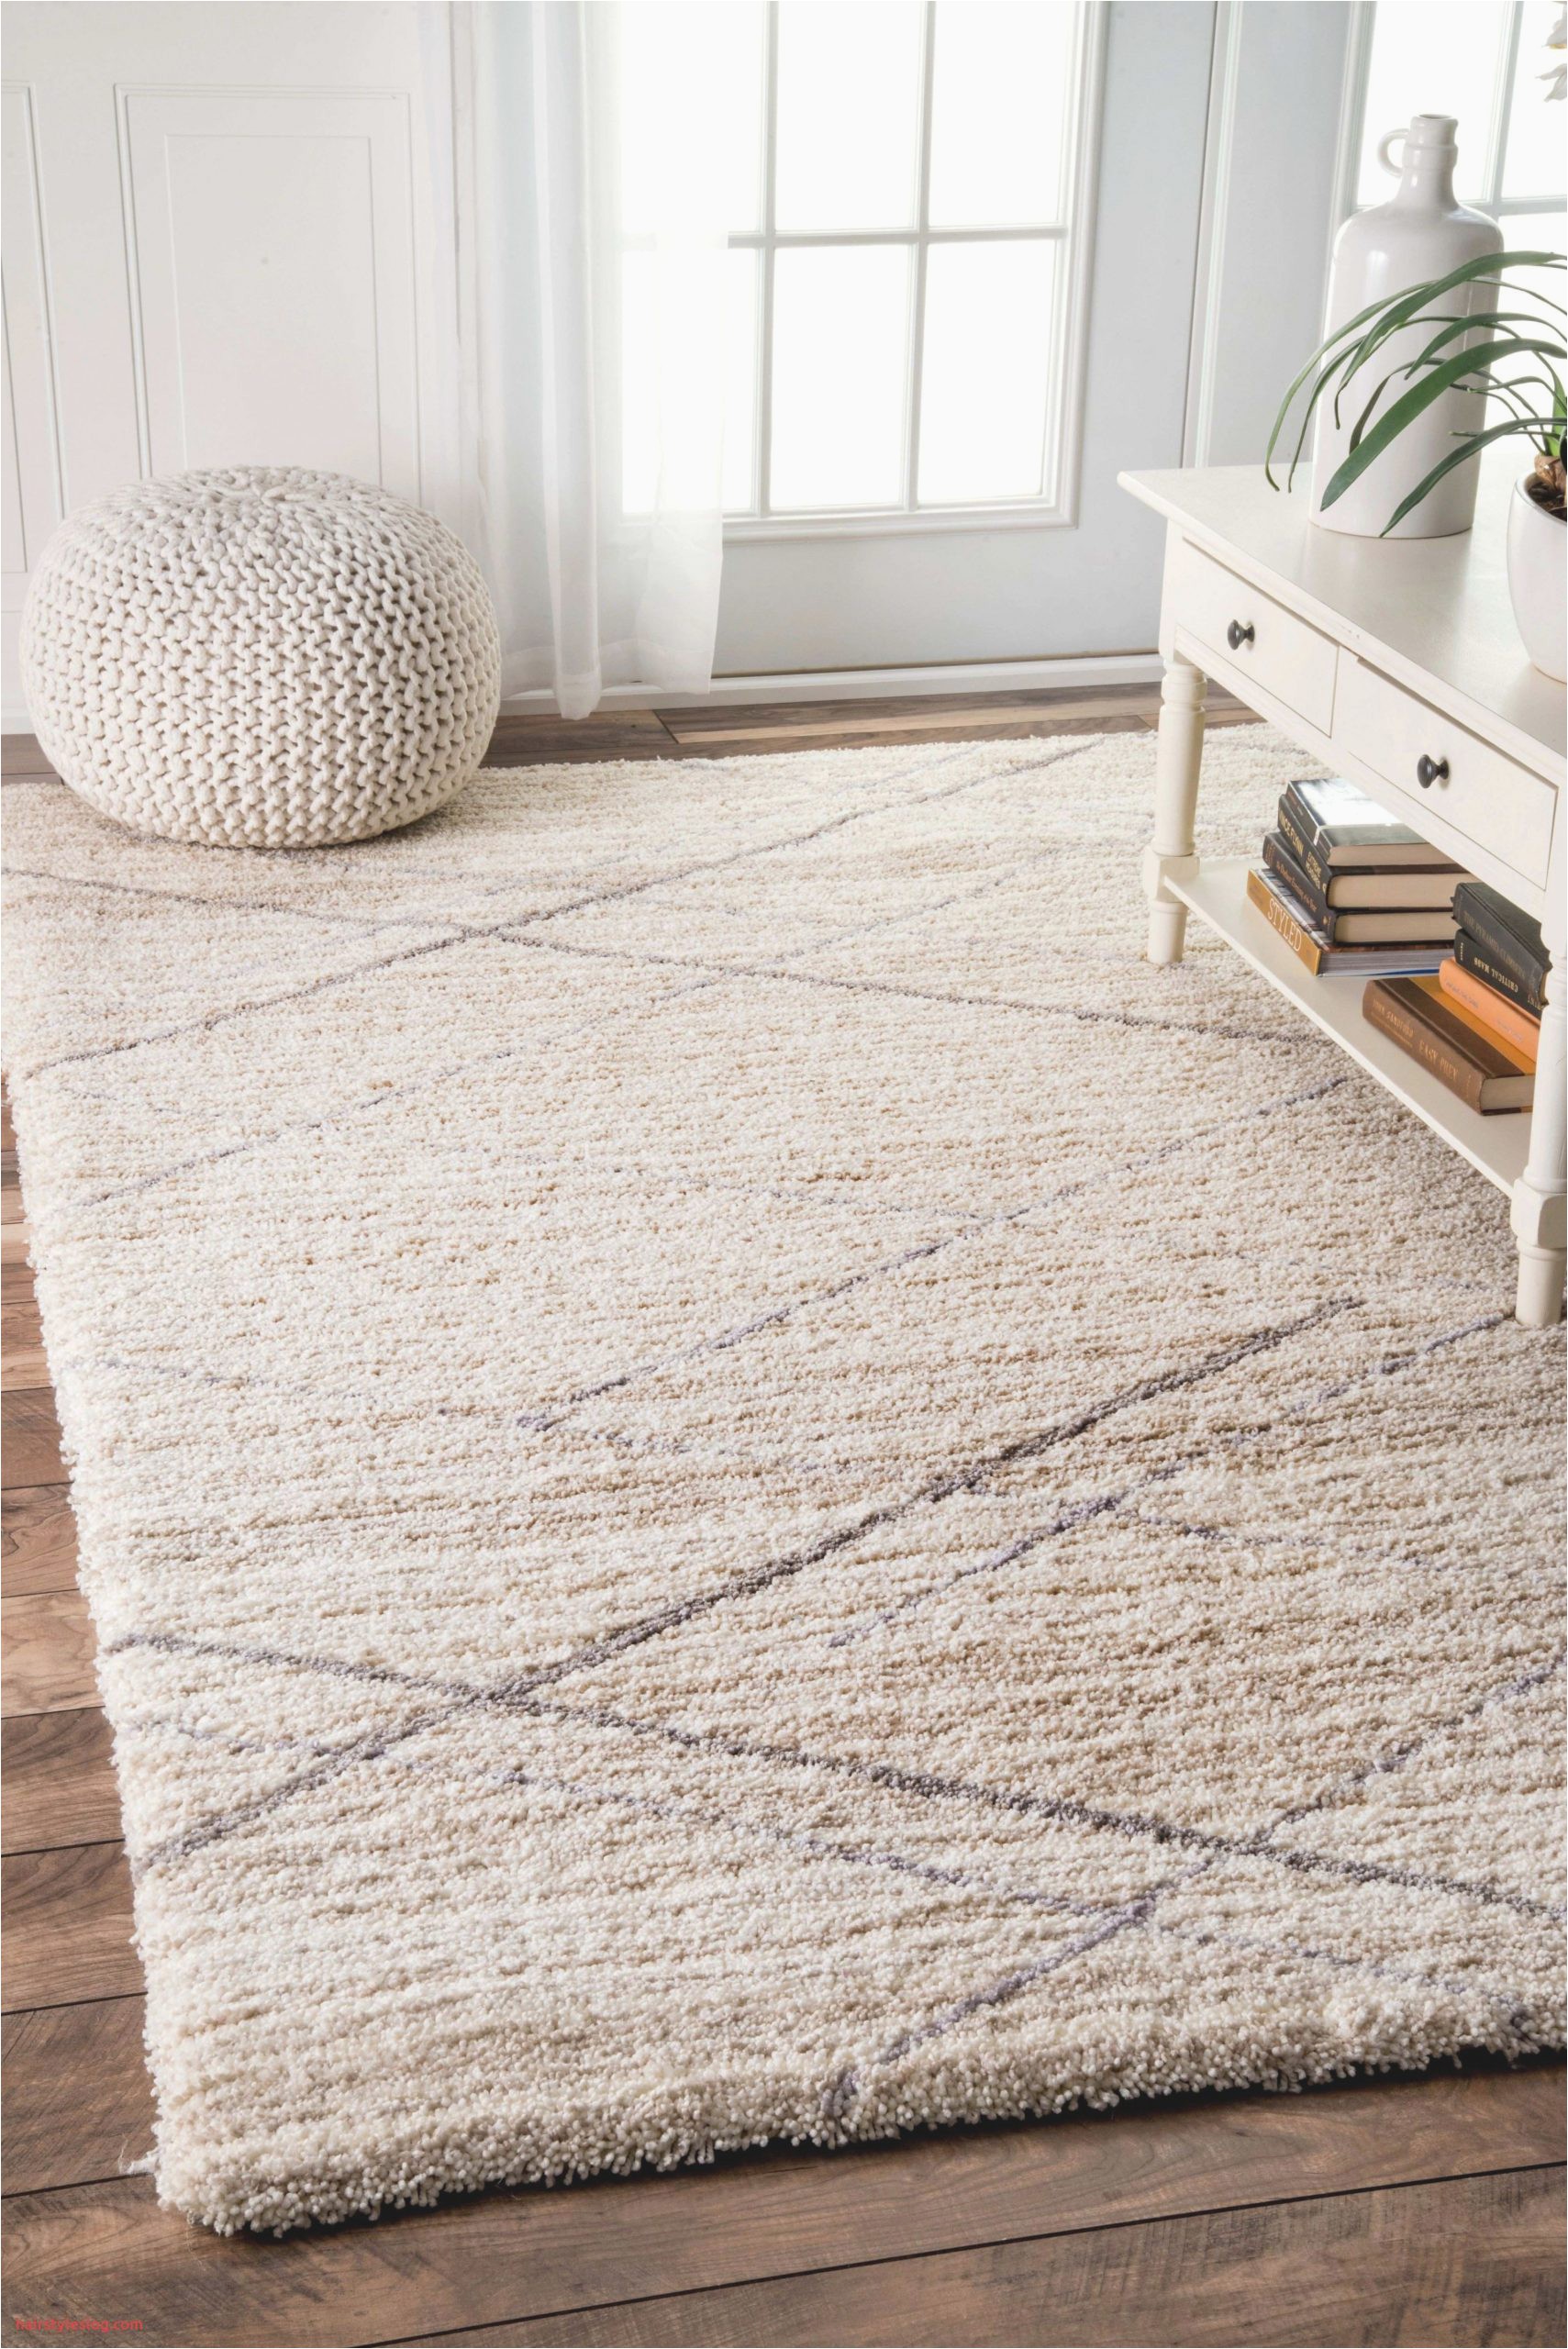 Large area Rugs at Big Lots Awesome Ideas Big area Rugs for Living Room Awesome Decors